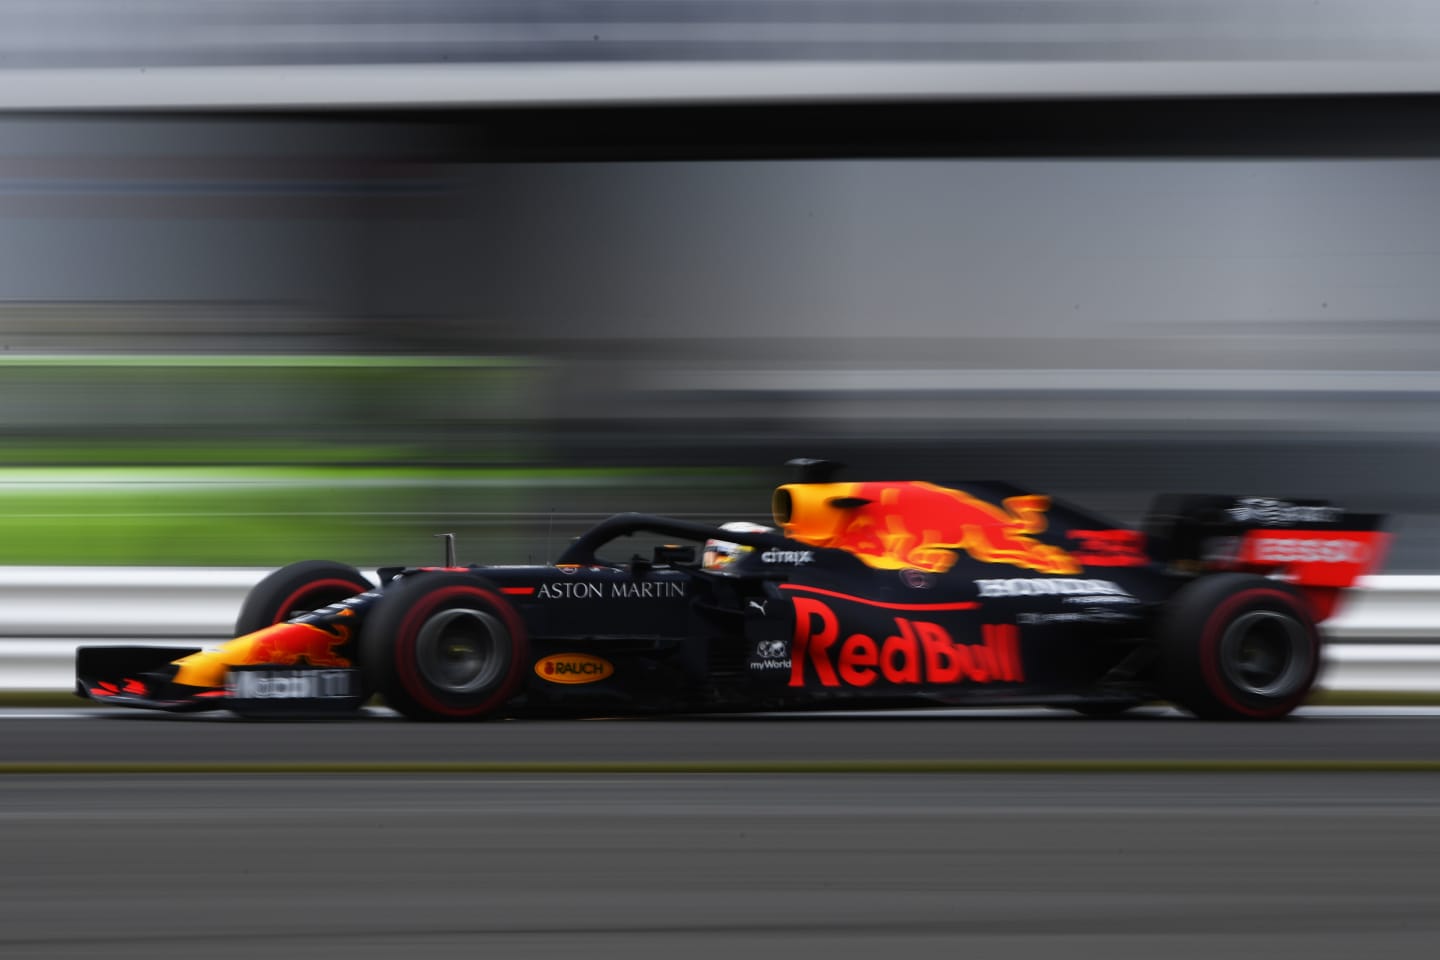 NORTHAMPTON, ENGLAND - AUGUST 07: Max Verstappen of the Netherlands driving the (33) Aston Martin Red Bull Racing RB16 on track during practice for the F1 70th Anniversary Grand Prix at Silverstone on August 07, 2020 in Northampton, England. (Photo by Rudy Carezzevoli/Getty Images)